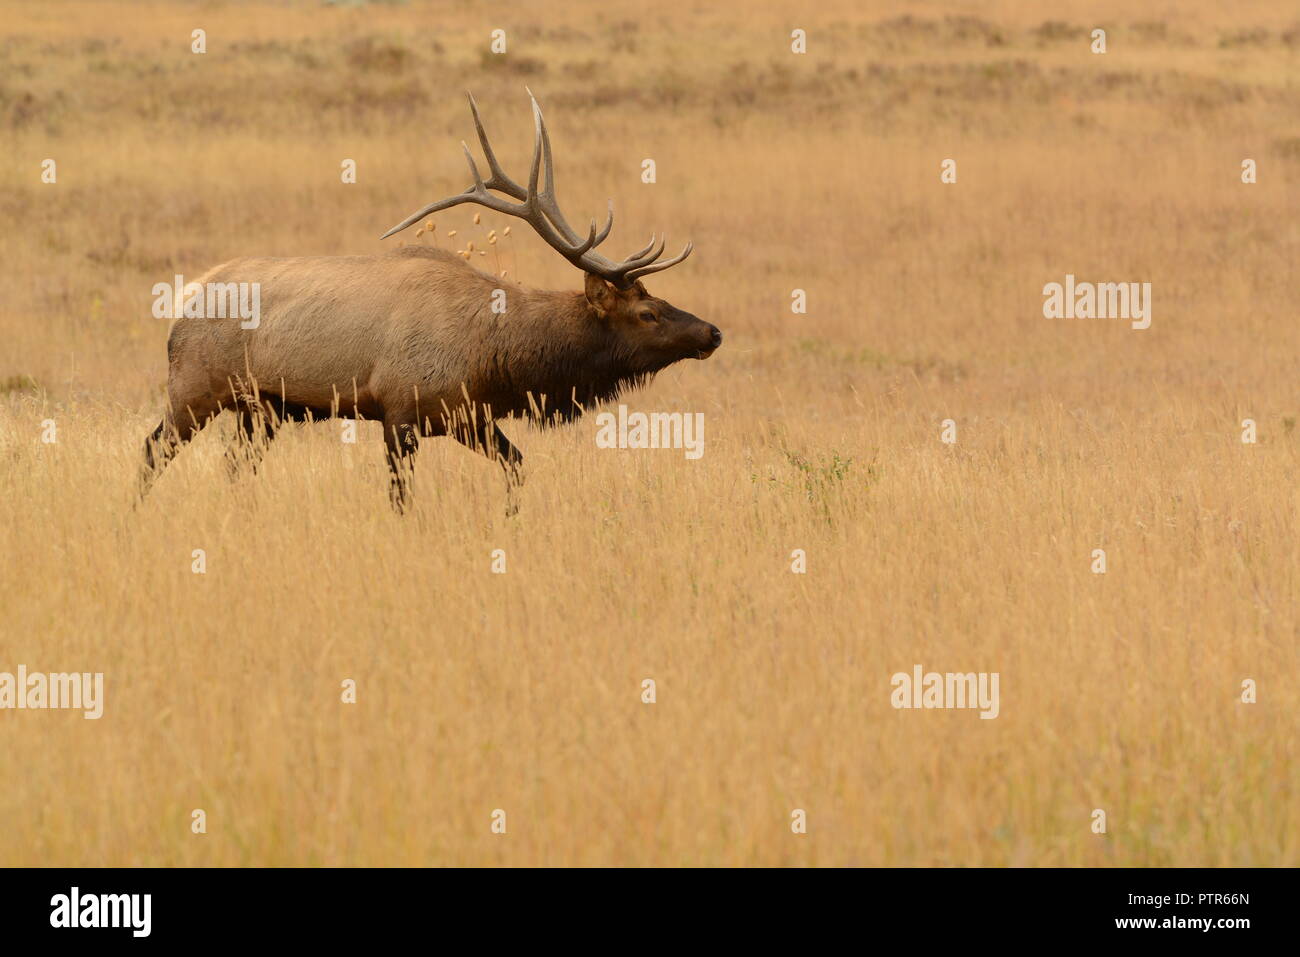 Bull elk with large antlers in golden meadow during autumn rut in the Rocky Mountains Colorado, USA Stock Photo